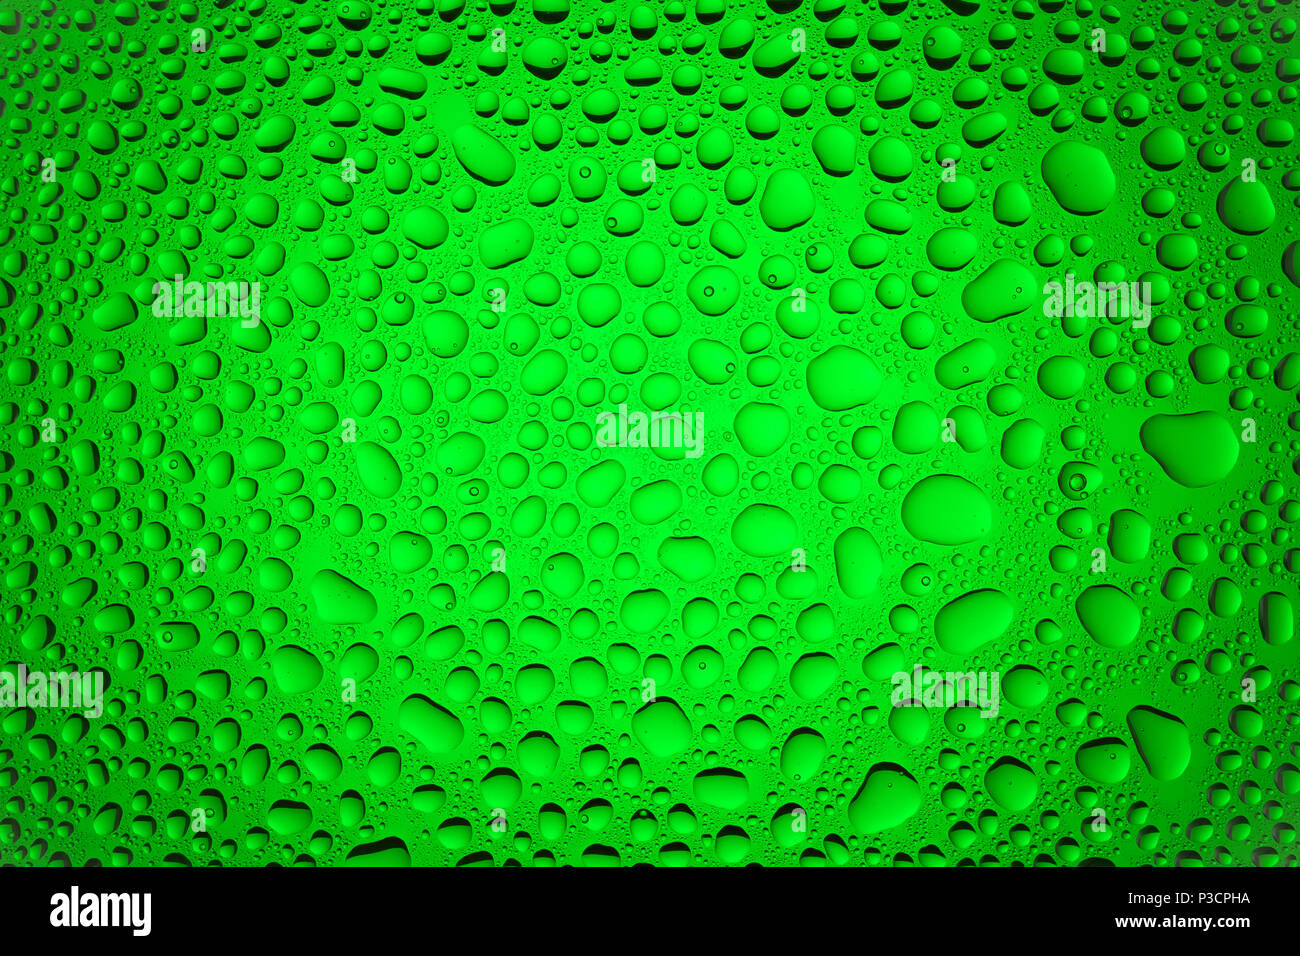 Close up of a water drops on a green gradient background, covered with ...